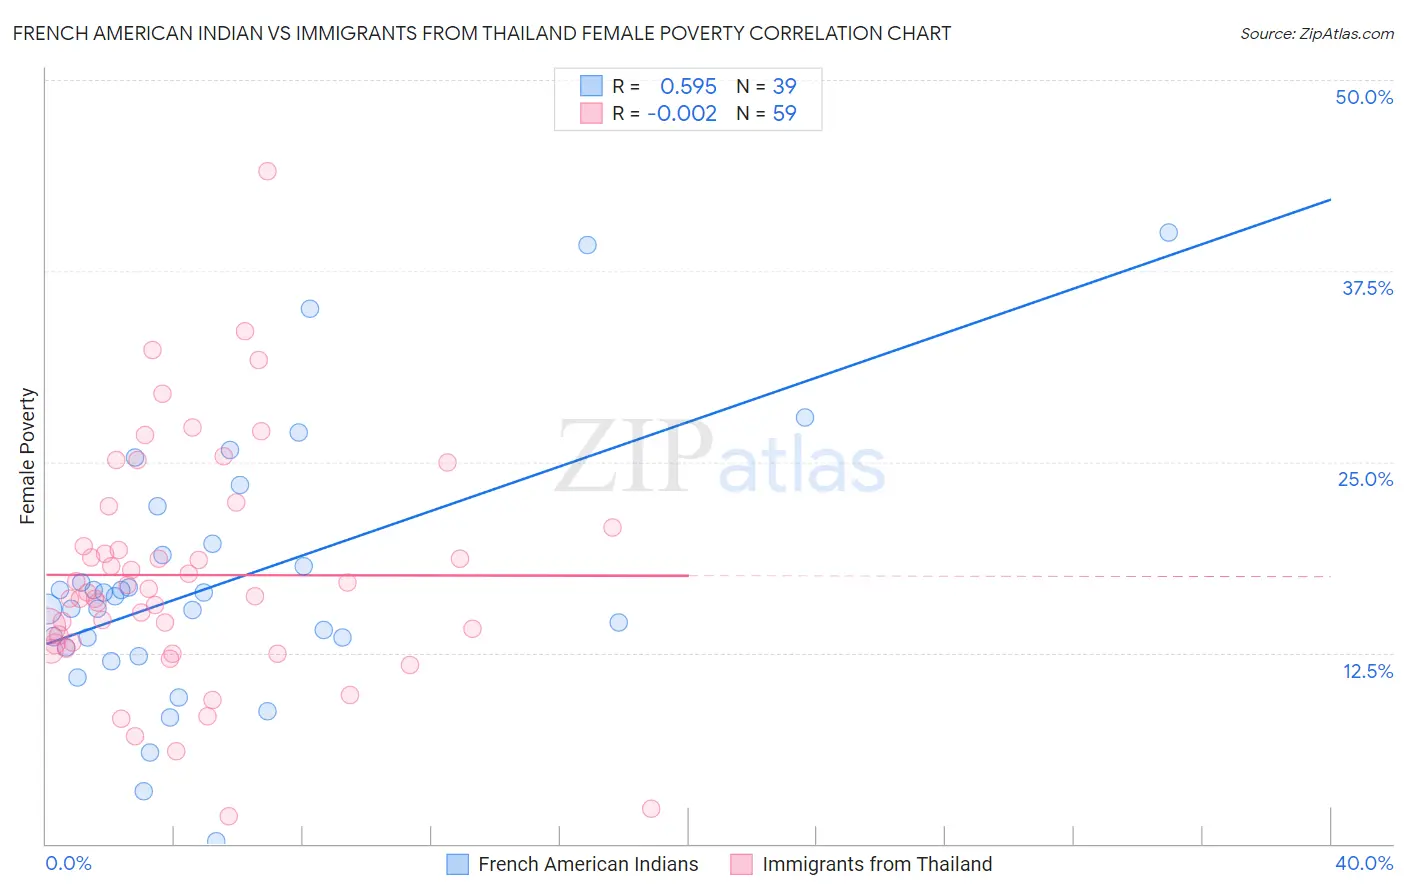 French American Indian vs Immigrants from Thailand Female Poverty